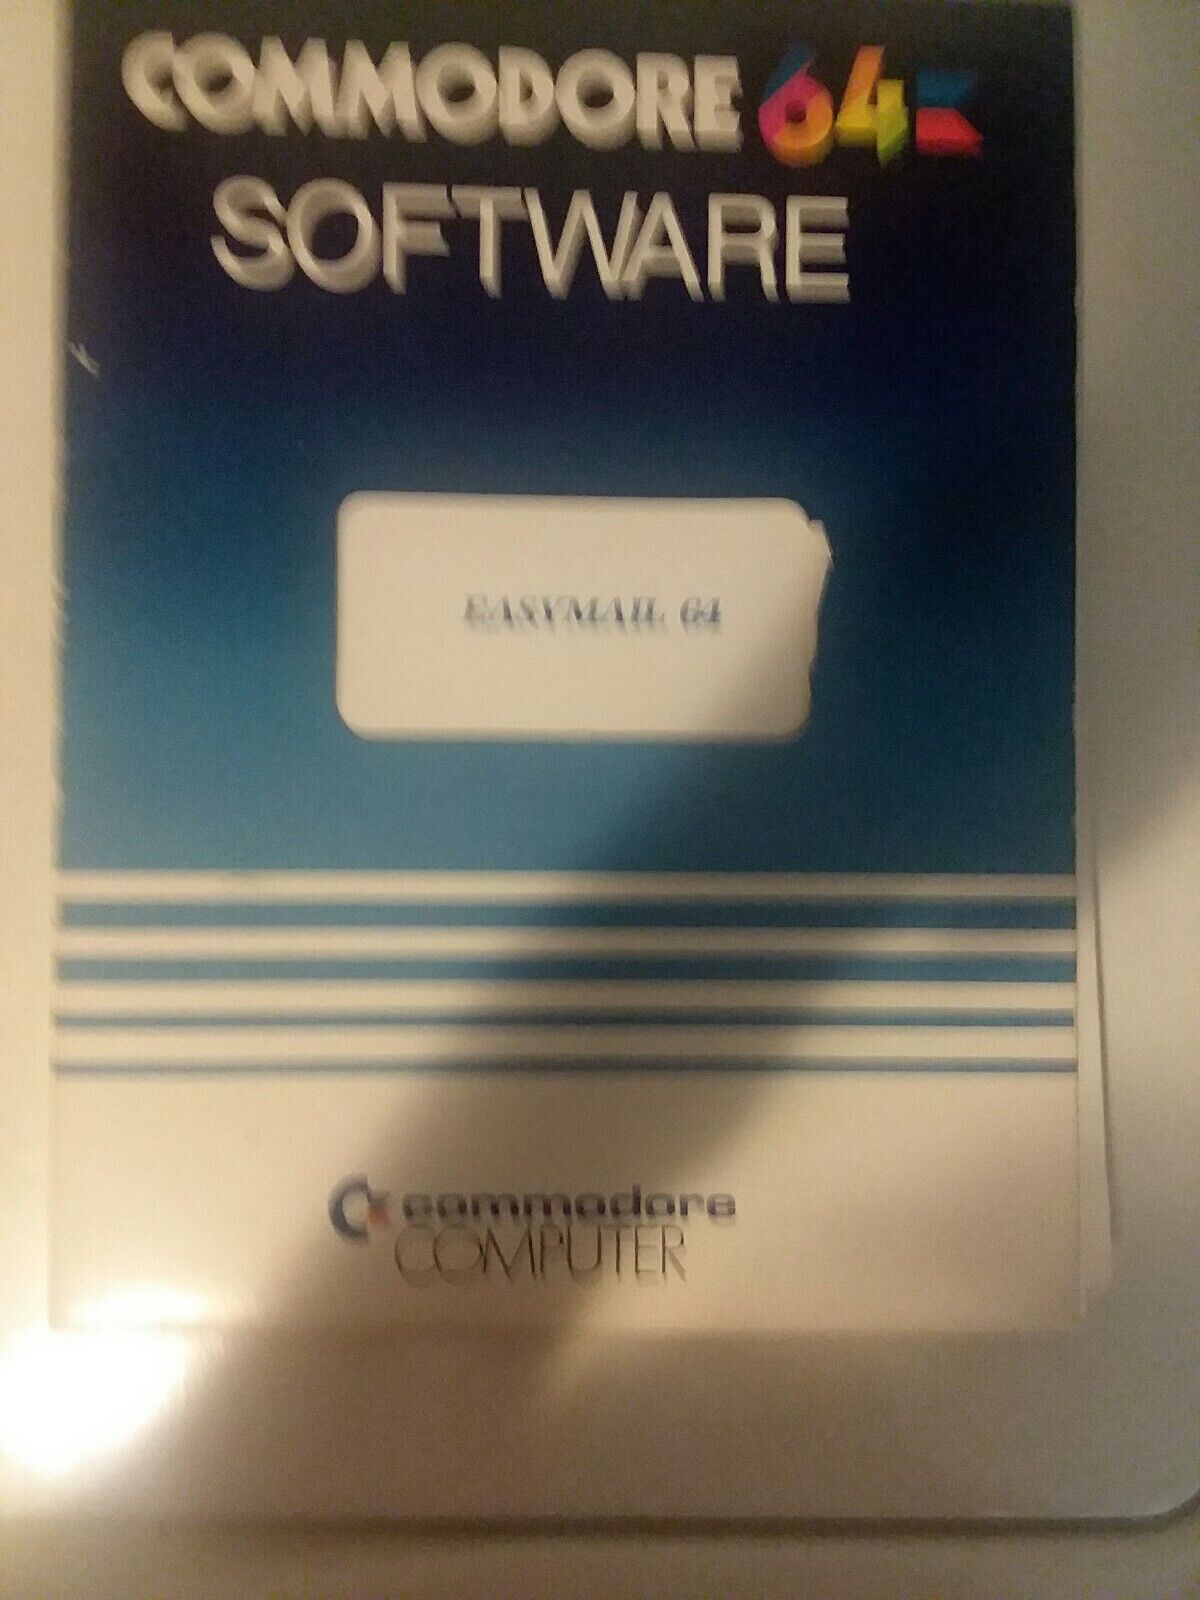 Easy Mail by Commodore for Commodore 64 Very Rare 1982 Business Software Ex. Con